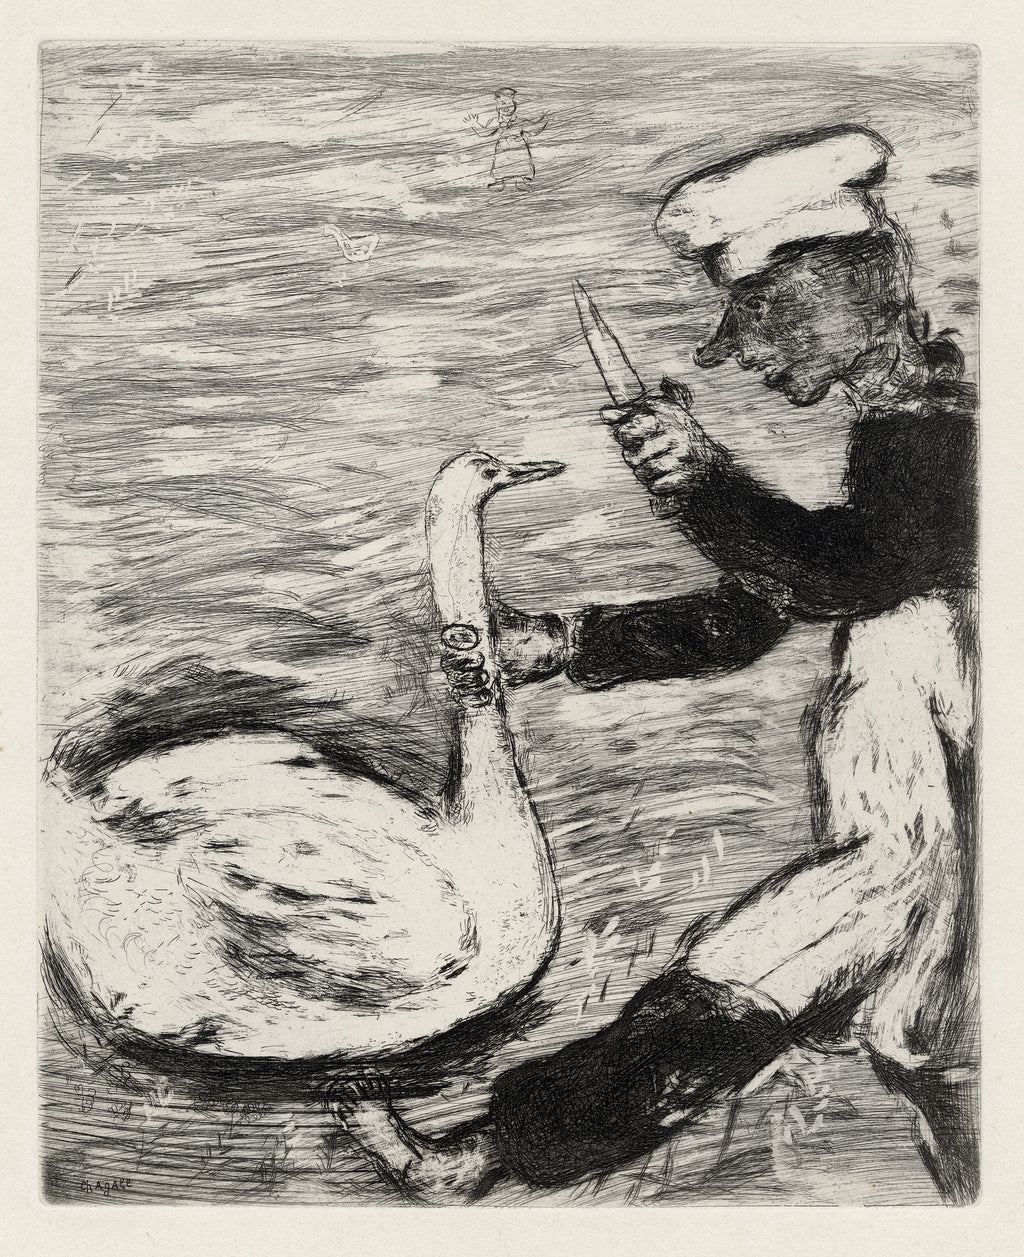 The Swan and the Cook